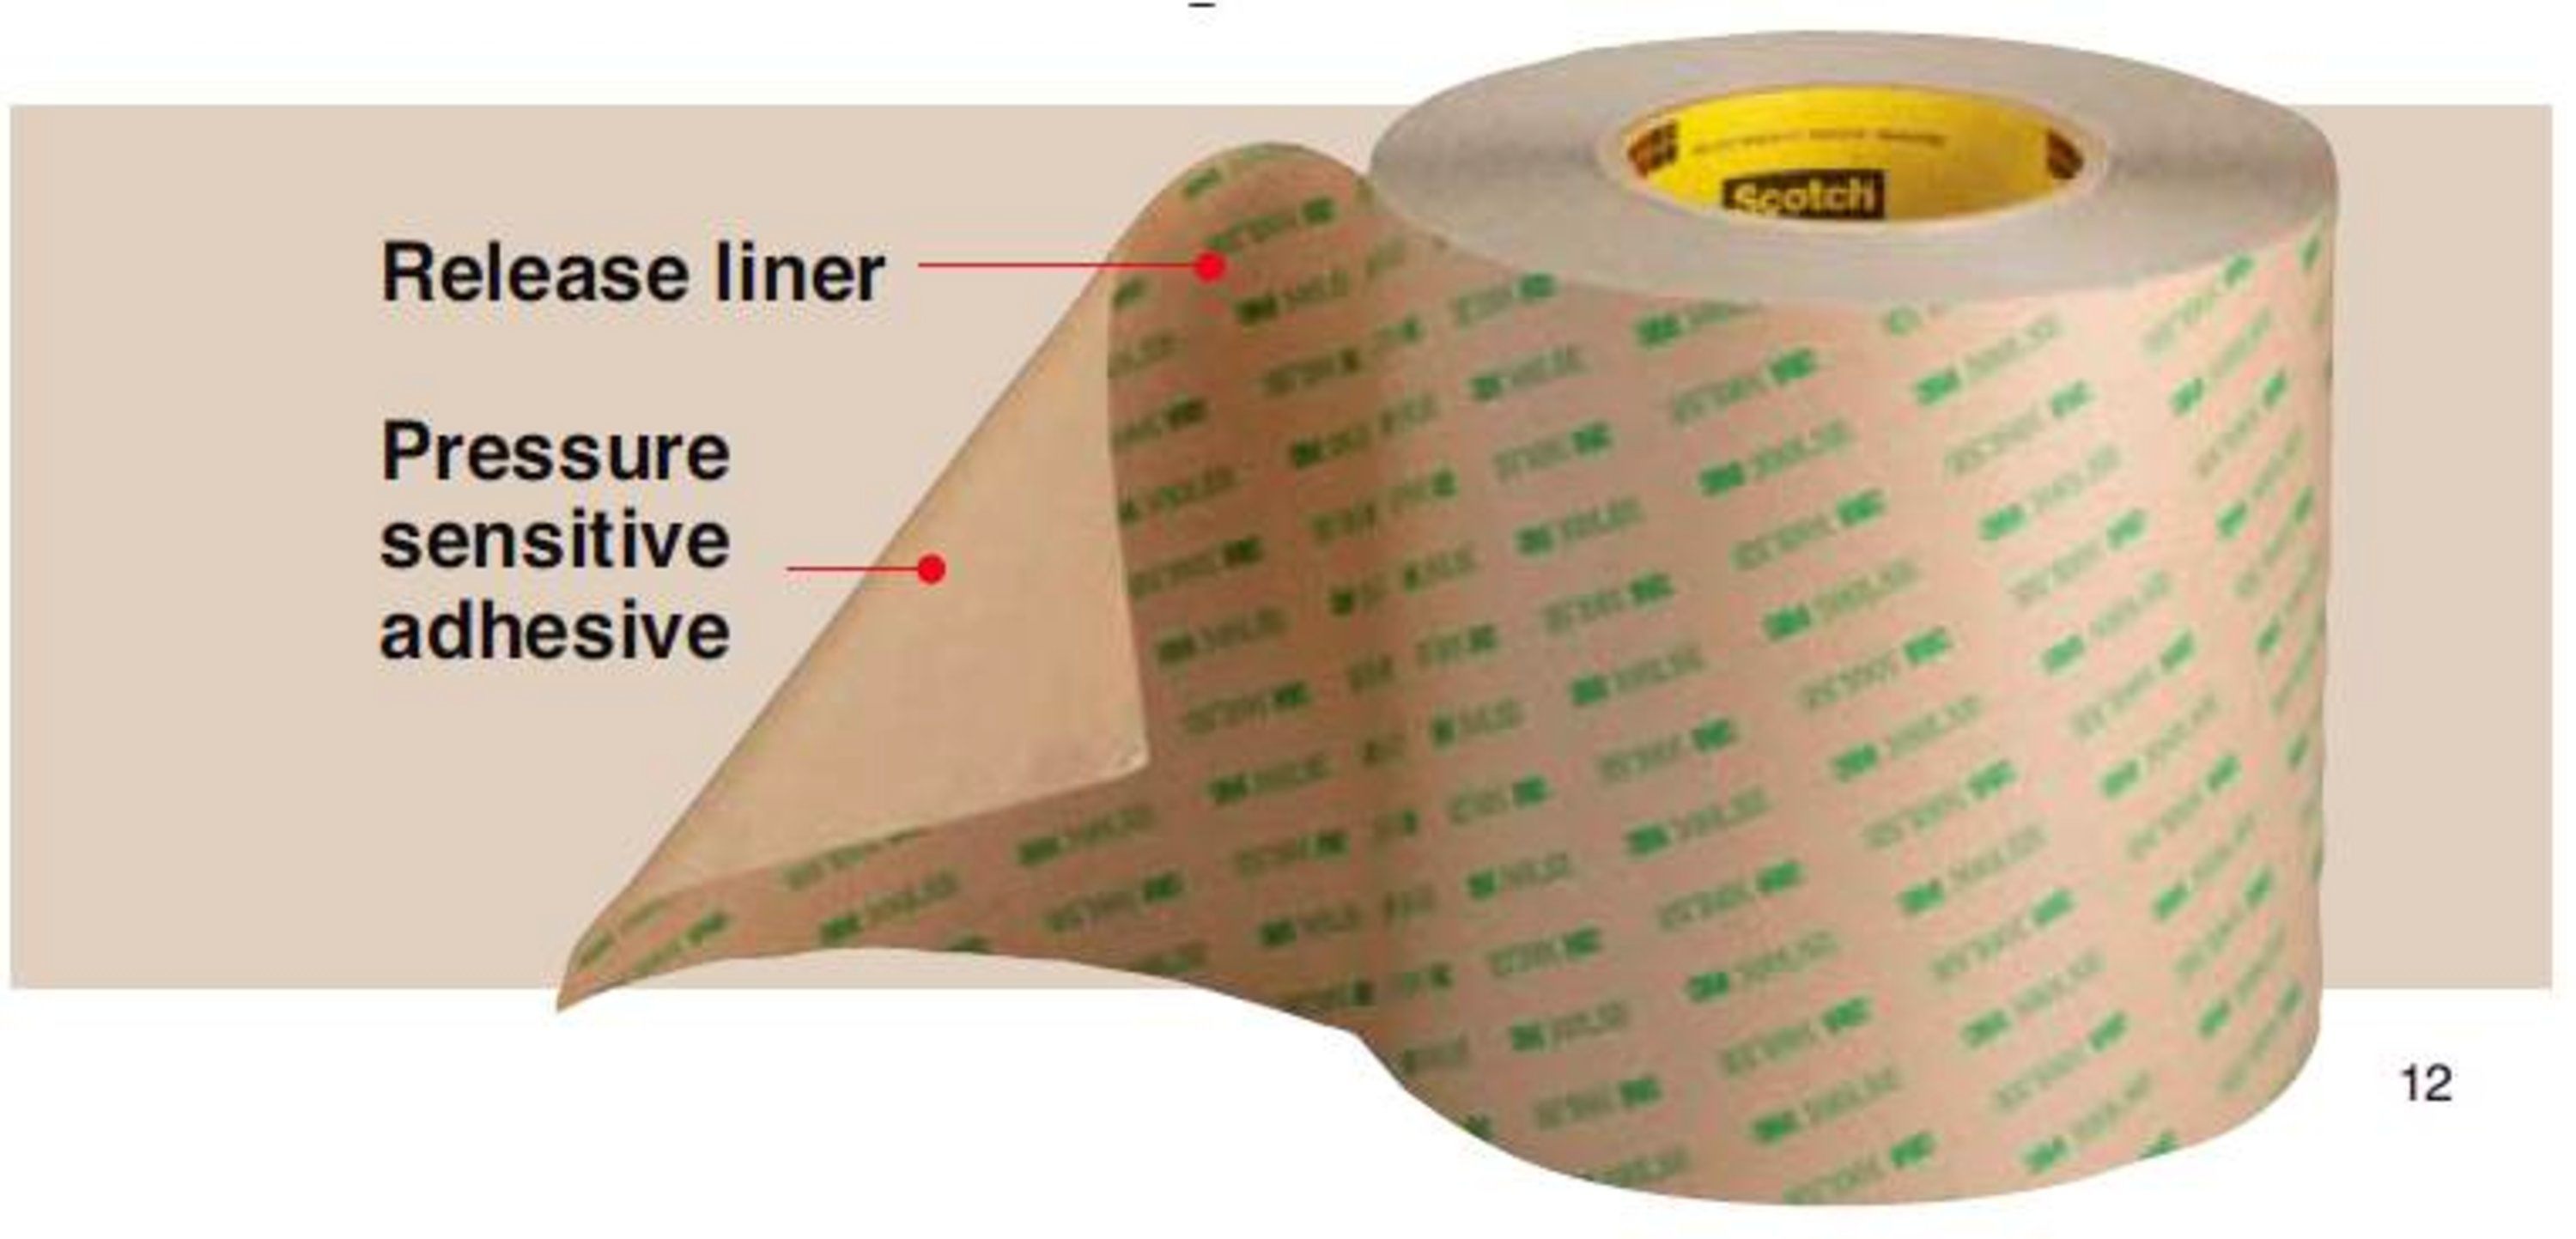 3M™ VHB™ Adhesive Transfer Tape F9473PC utilizes the bonding power of 3M™ High Performance Acrylic Adhesive 100MP, providing much higher adhesion strength than typical pressure sensitive adhesive systems.